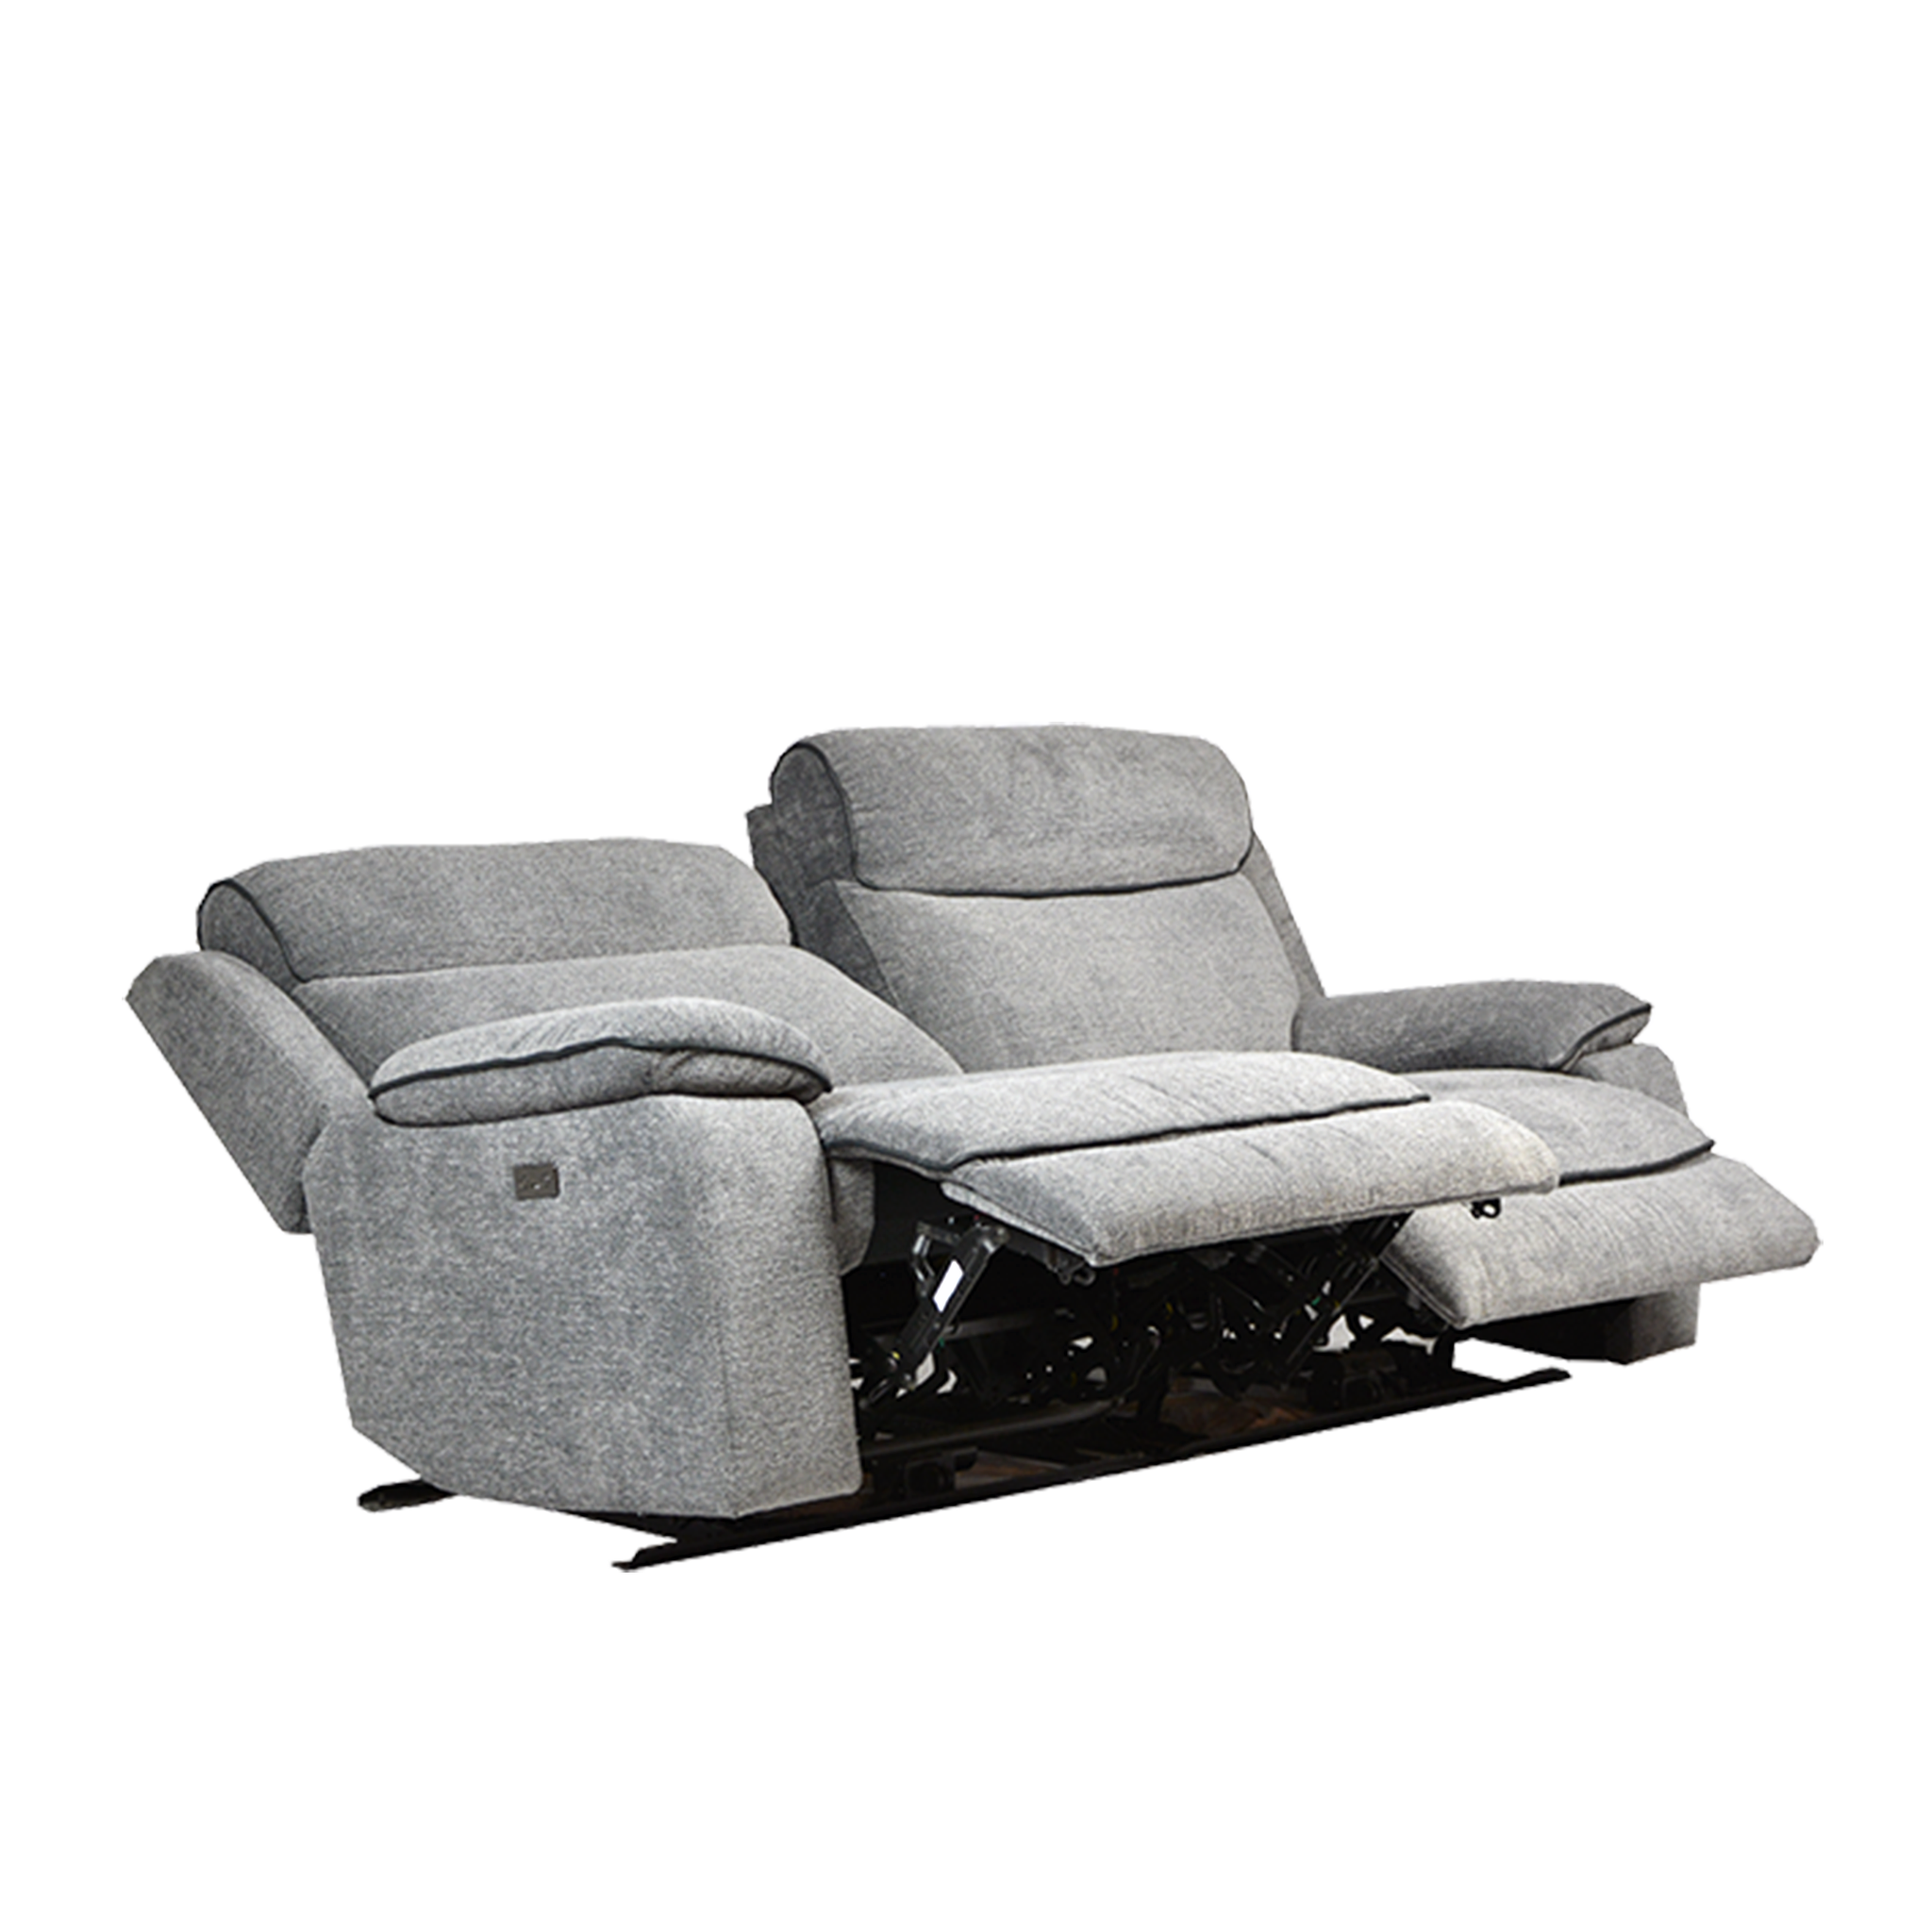 2 Seater Electric Recliner Sofa in Fabric Duxton